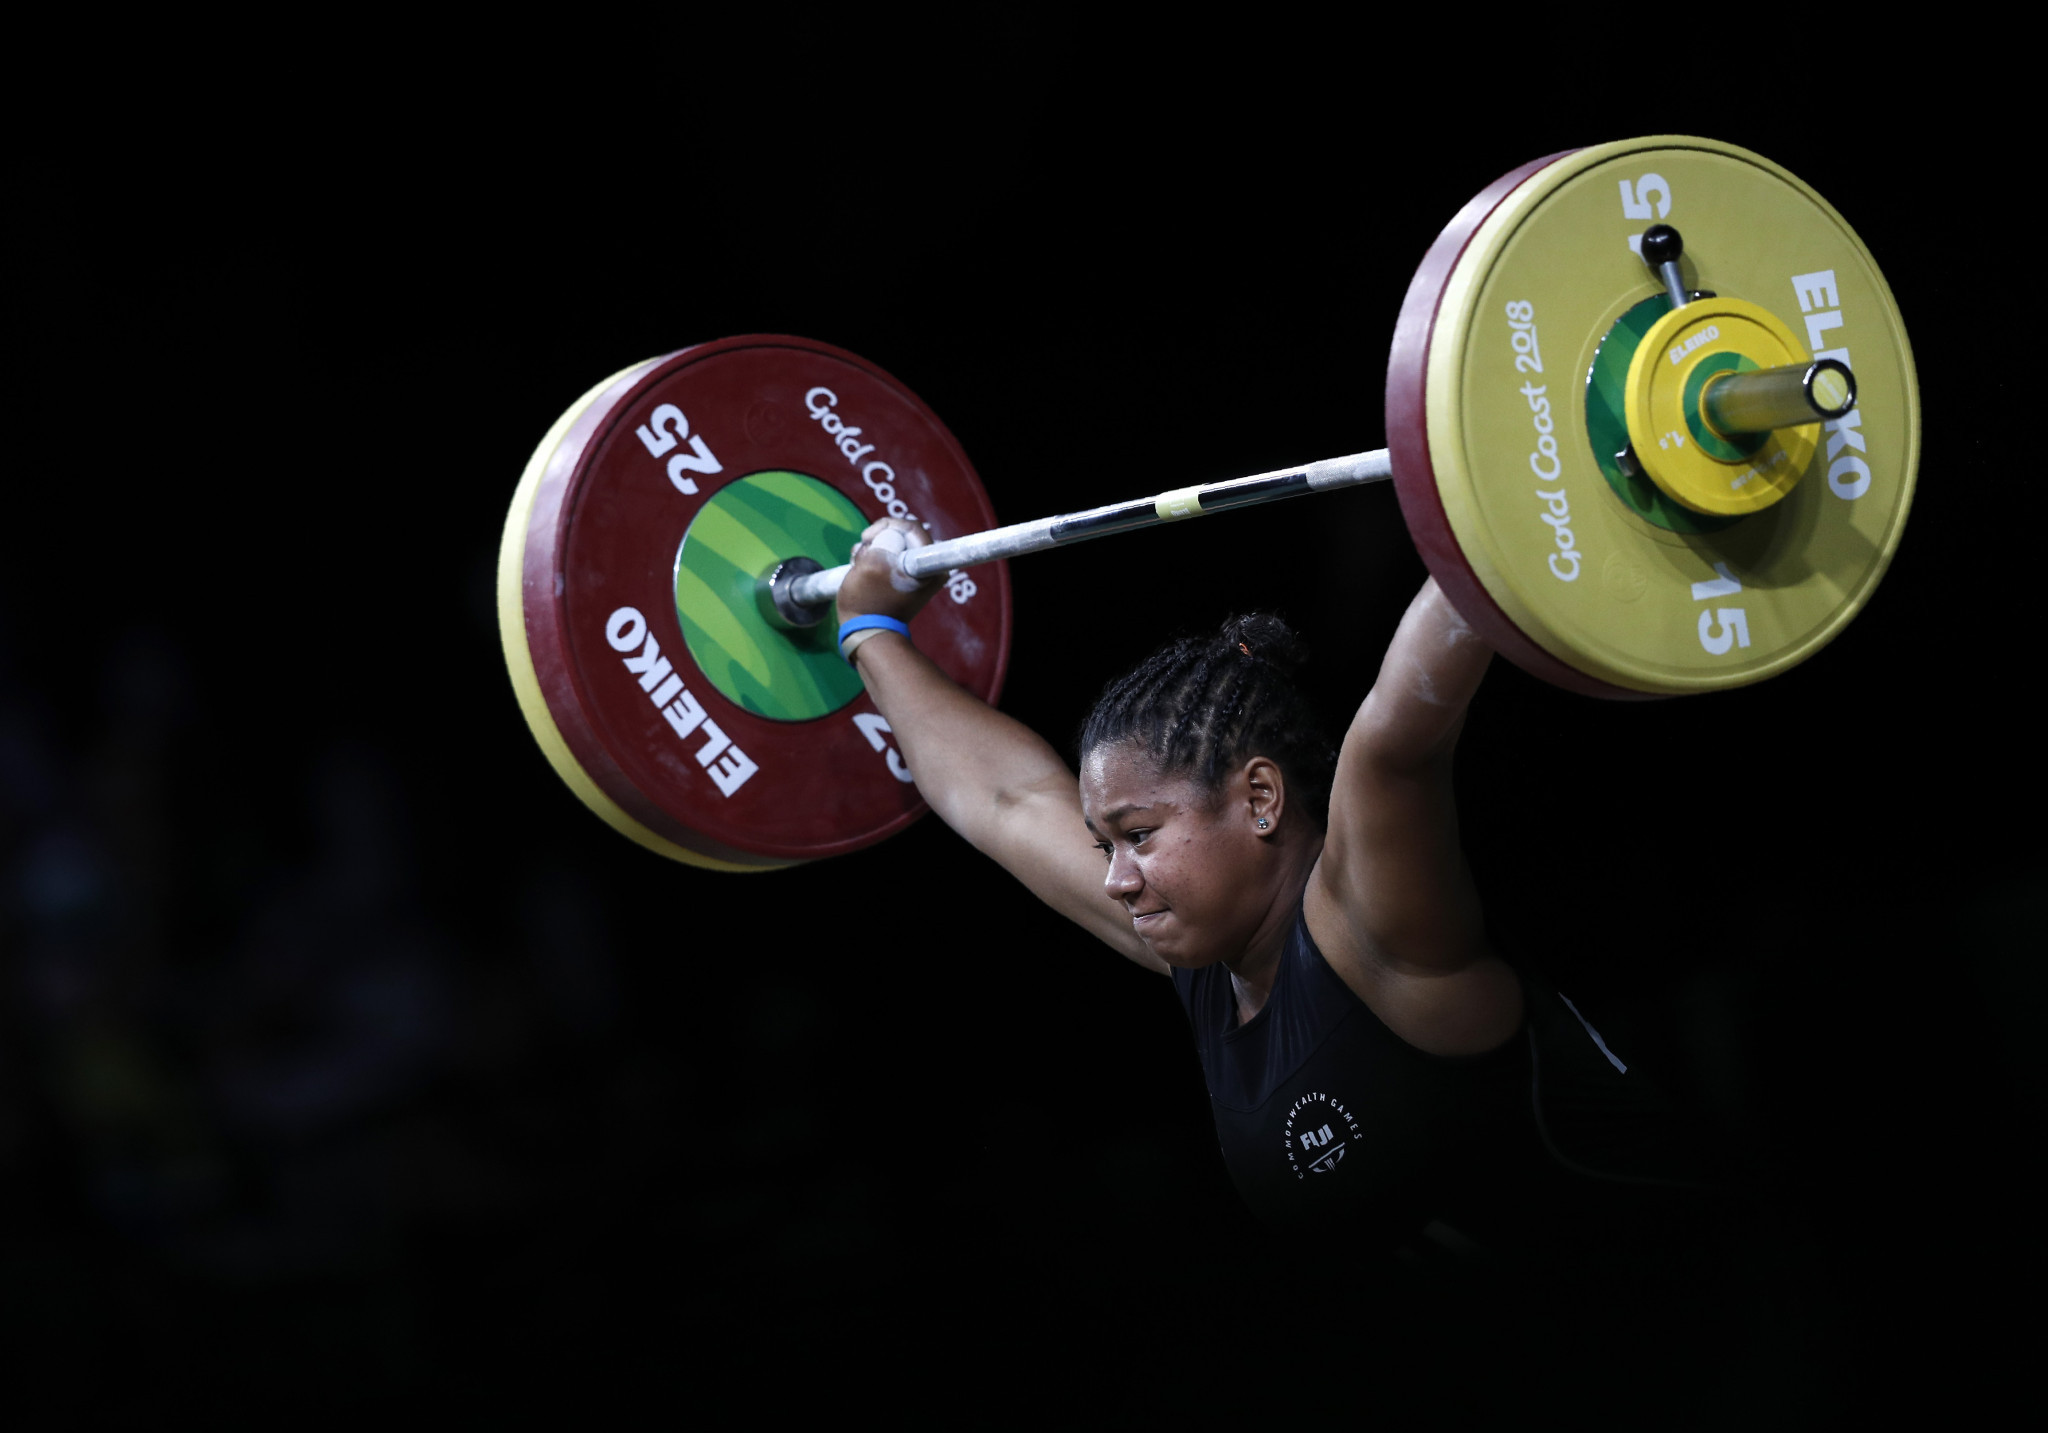 Eileen Cikamatana, who now competes for Australia, was one of the most impressive performers 